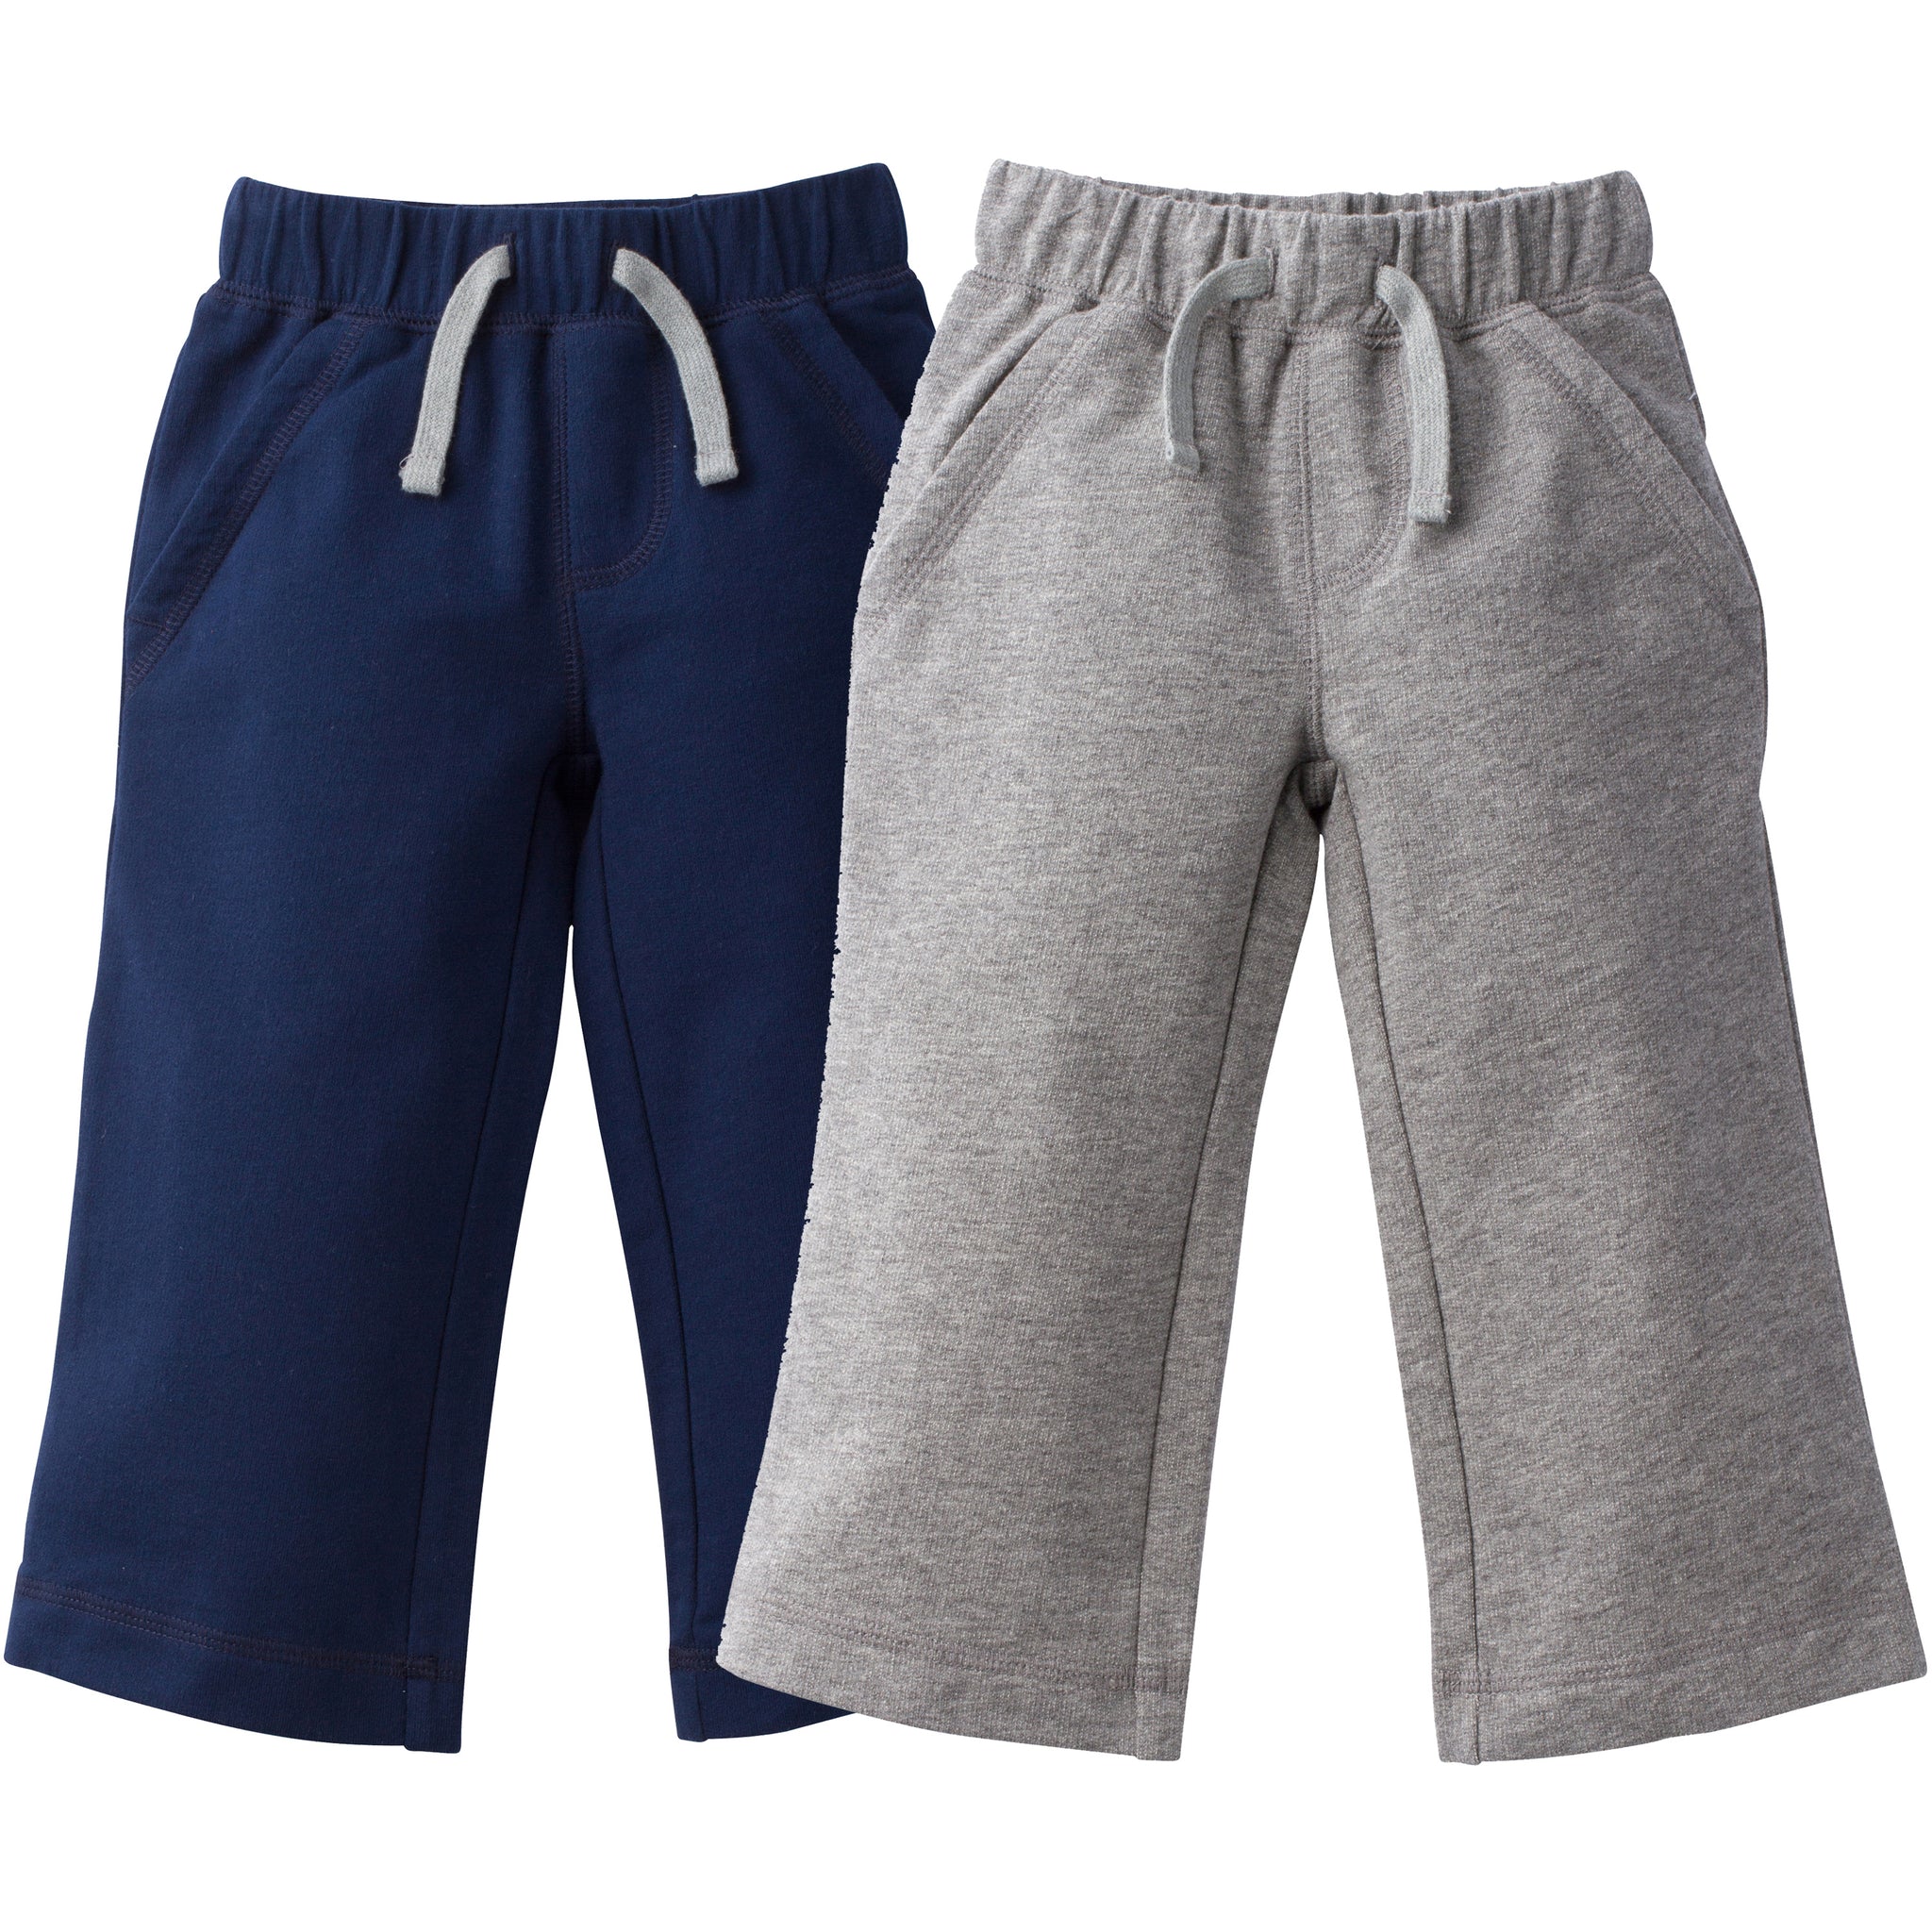 2-Pack Baby Boys Navy and Grey Pants-Gerber Childrenswear Wholesale